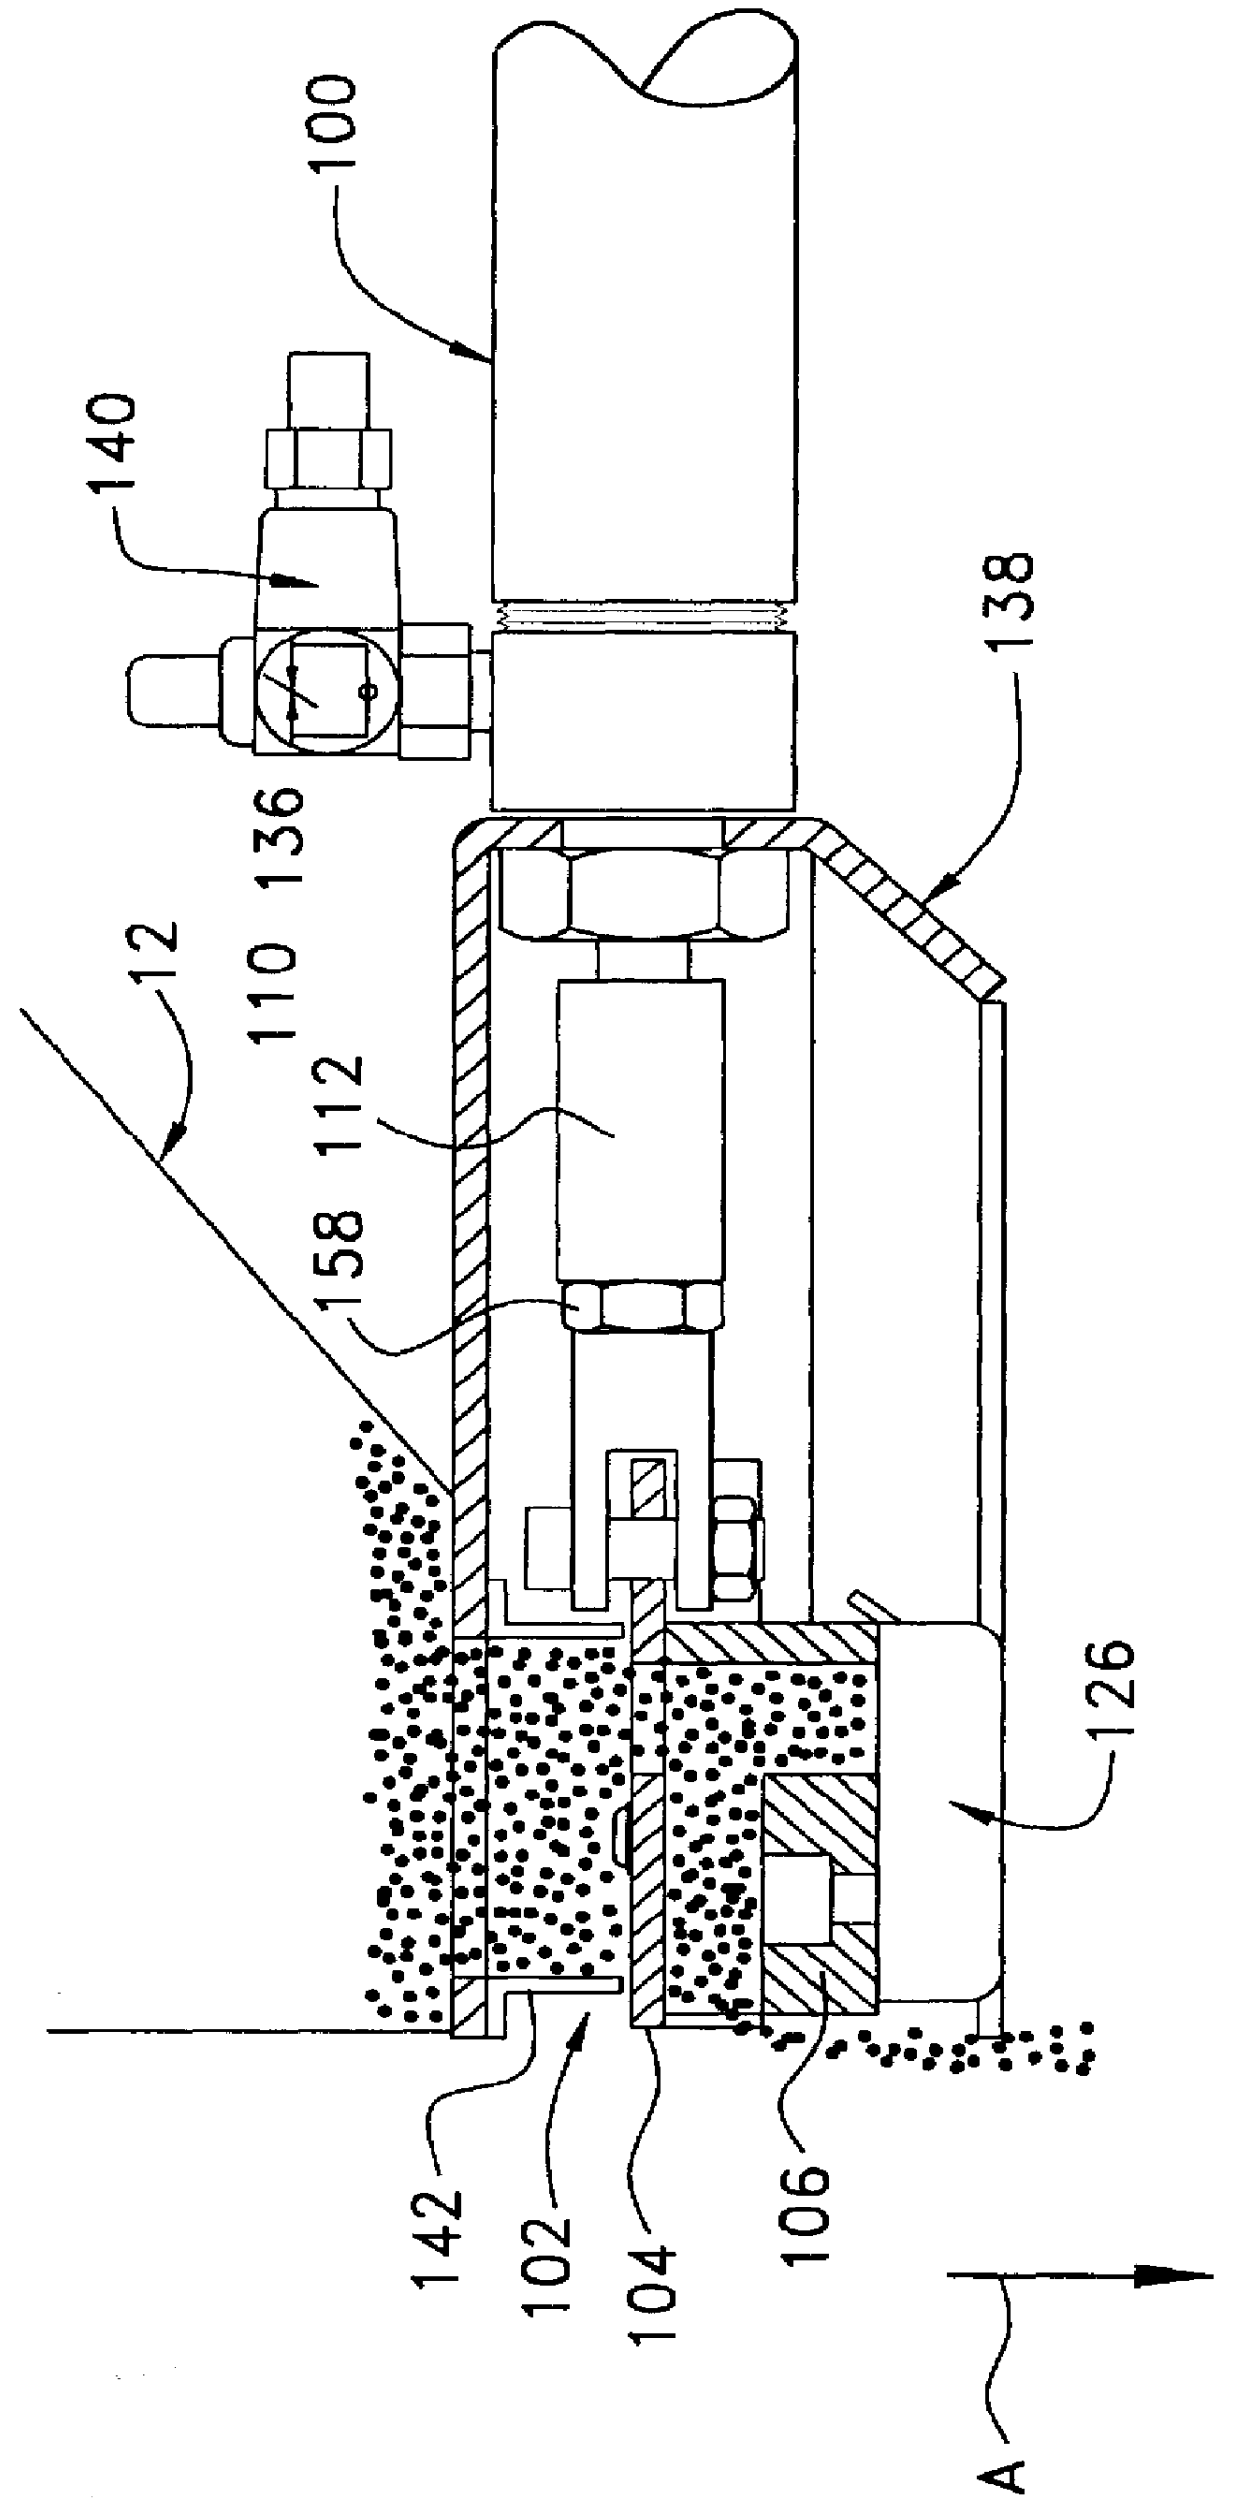 Apparatus and method for gravimetric blending with horizontal material feed